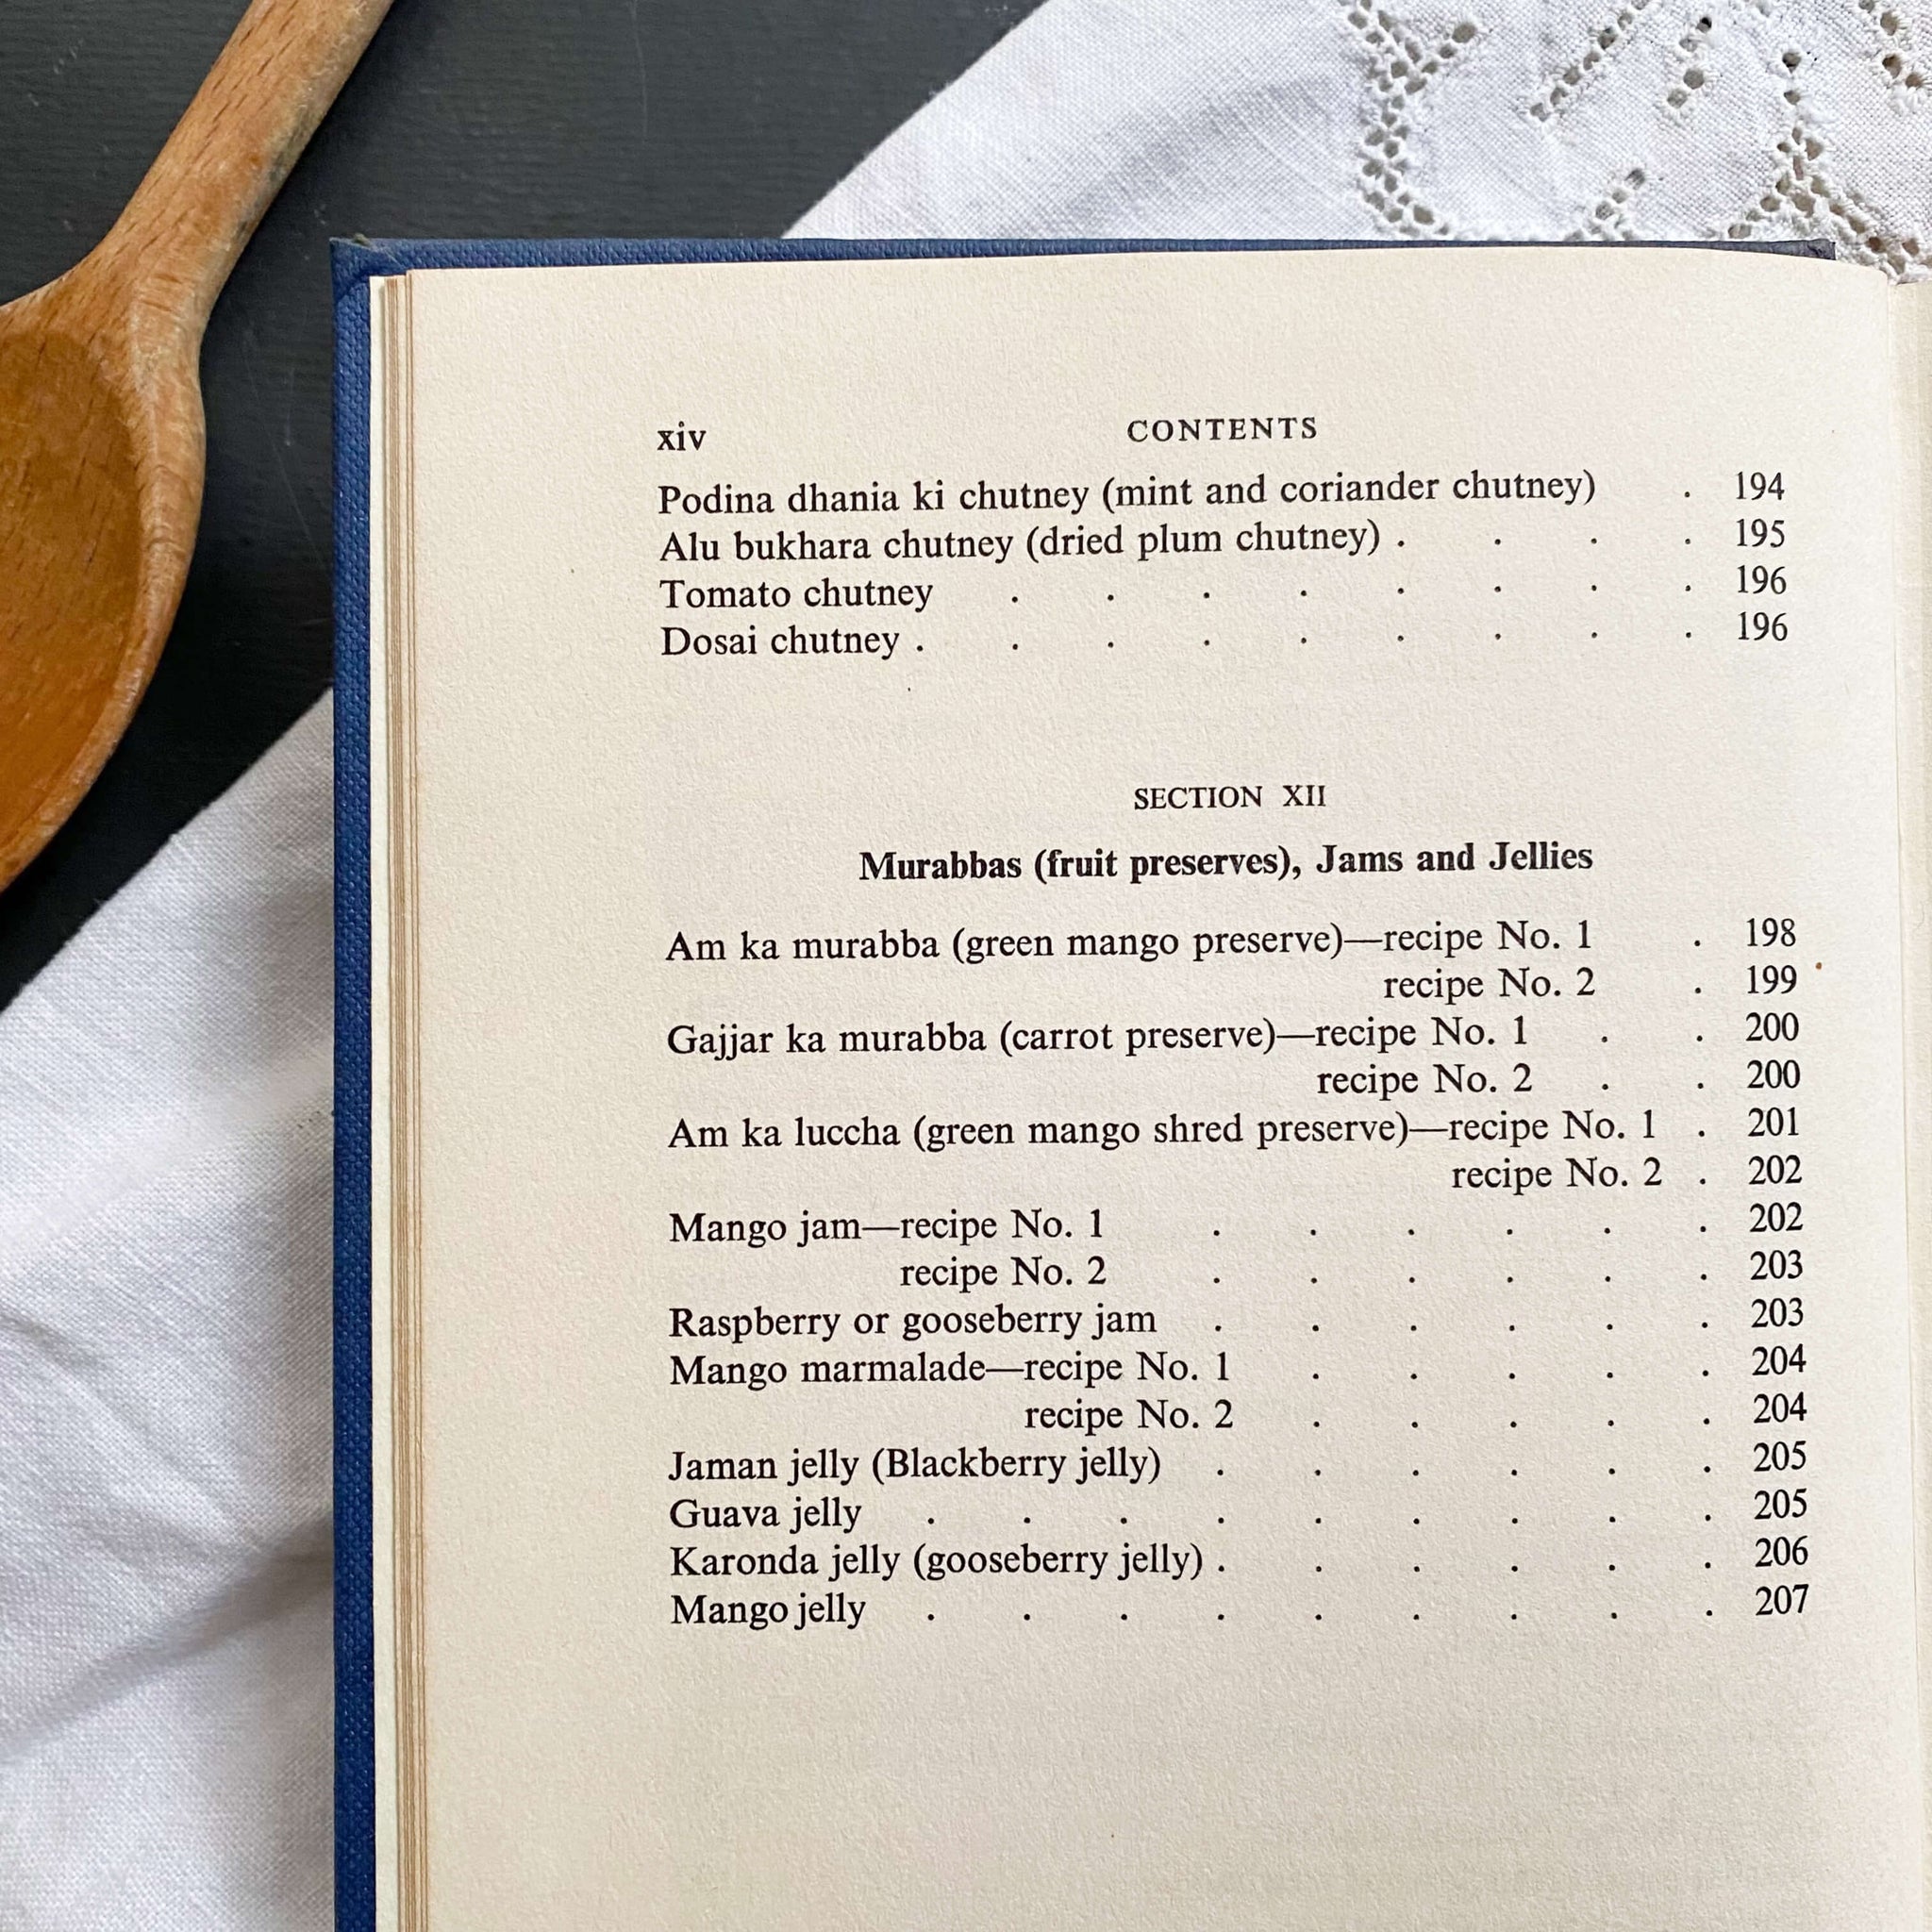 Mrs. Balbir Singh's Indian Cookery - 1965 Edition Second Printing